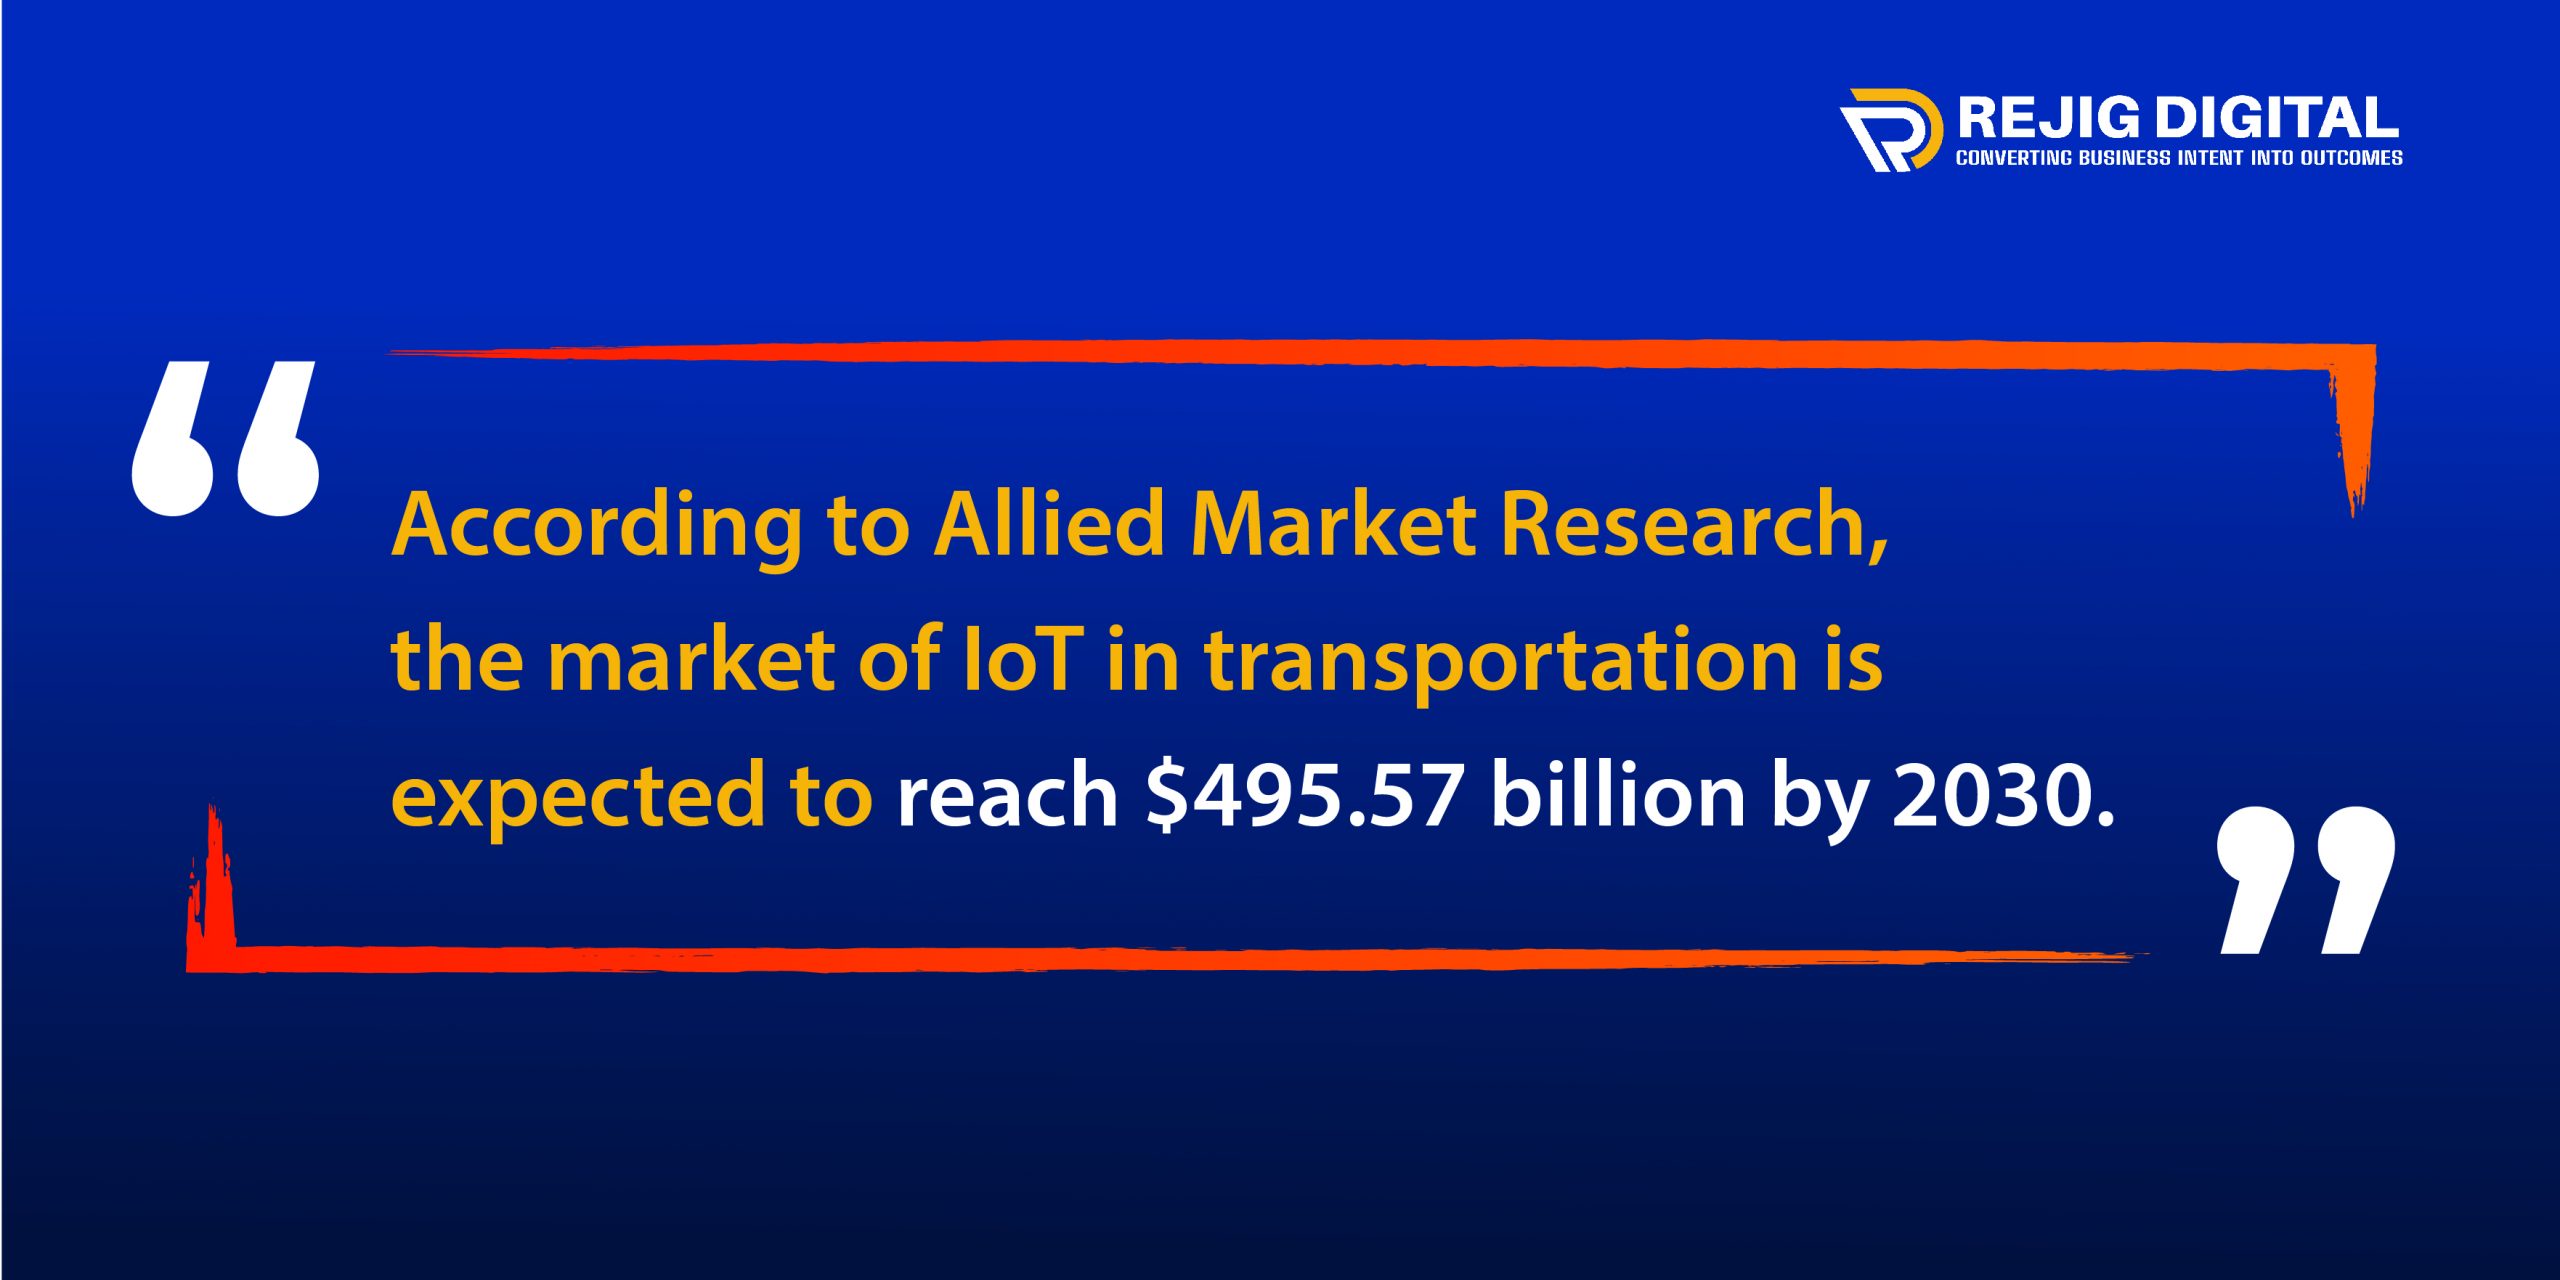 According to Allied Market Research, the market of IoT in transportation is expected to reach $495.57 billion by 2030.